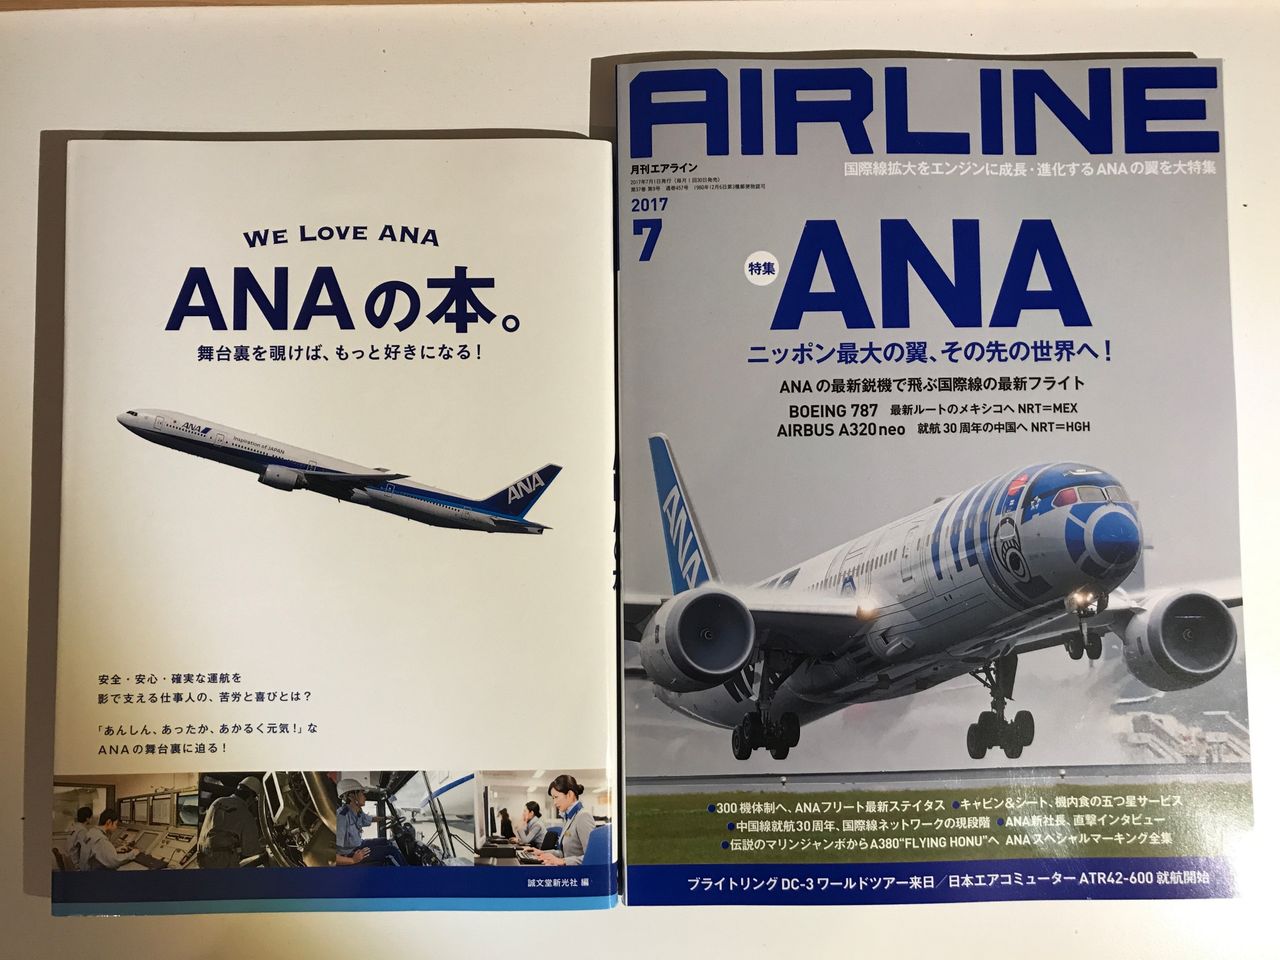 Review of ANA flight from Tokyo to Munich in Economy